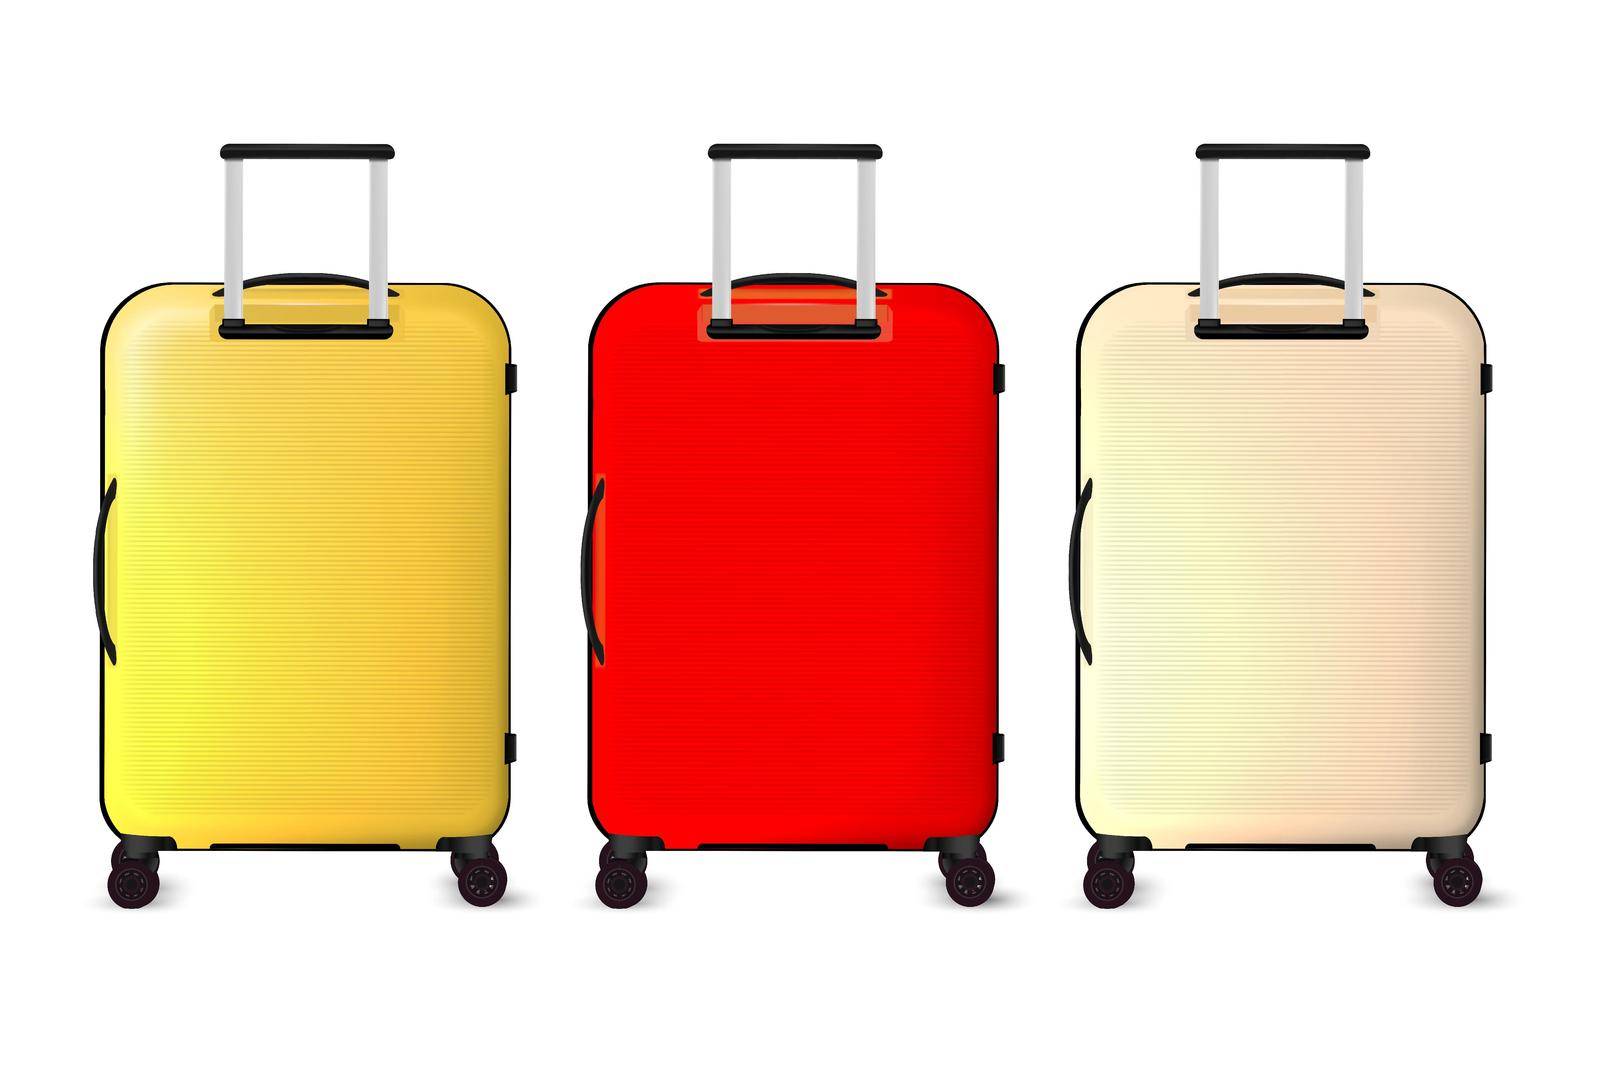 3d vector illustration set of luggage suitcase travel bags. Journey baggage cases on wheels with handles, realistic vacation tourist bag. Airport carry briefcase, plastic voyage trolley. by Samodelkin20